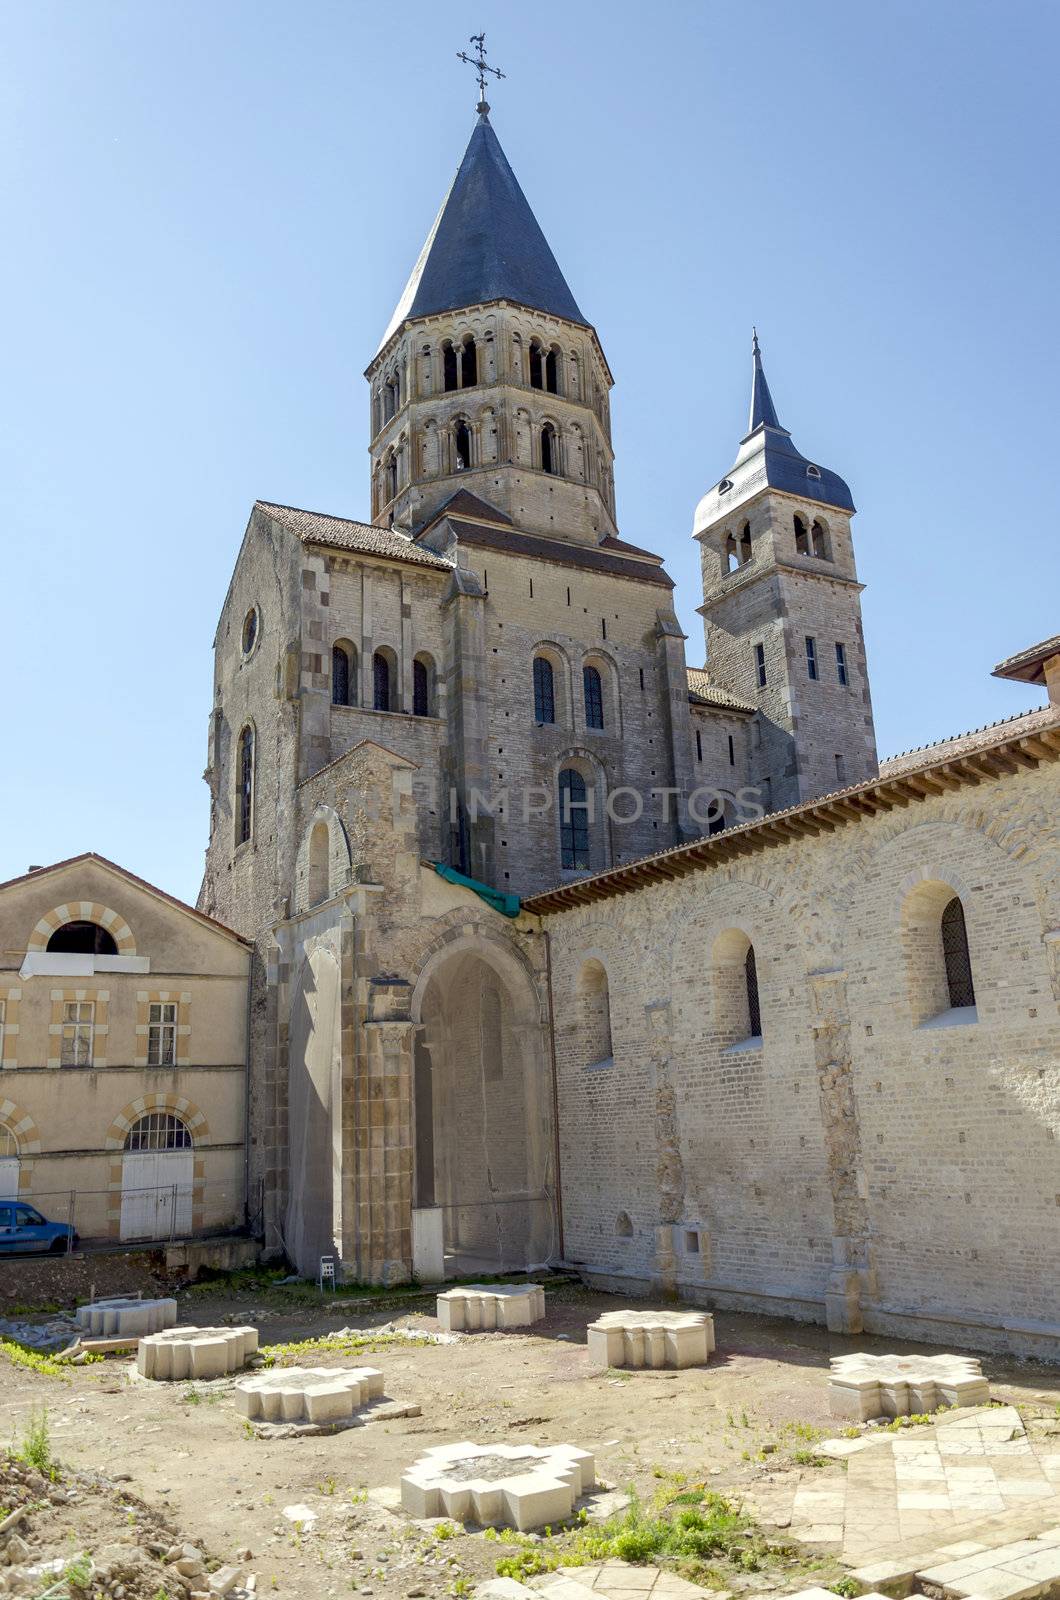 Remaining bell tower of Cluny III abbey.